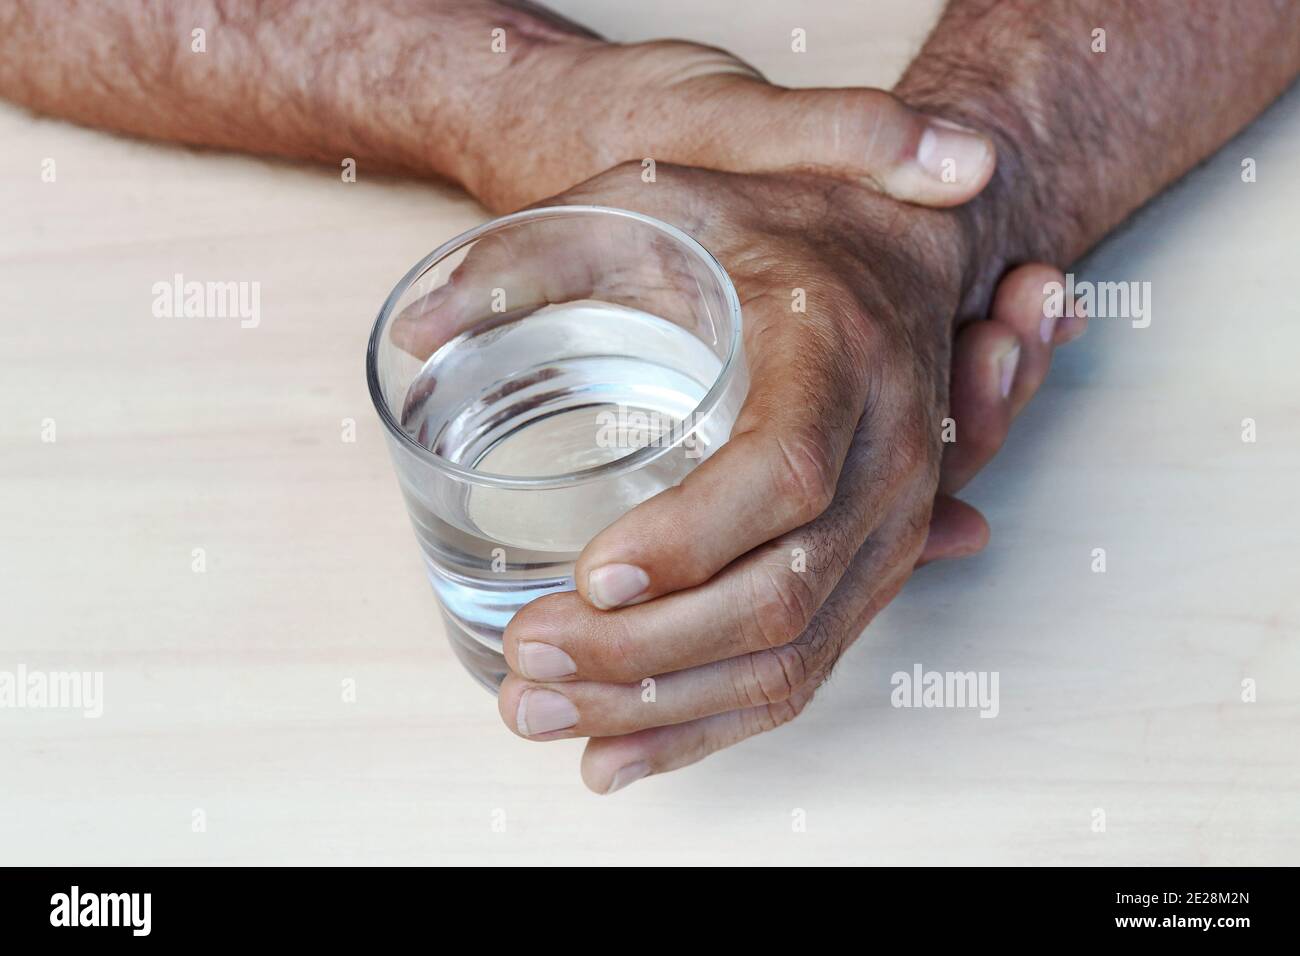 The hands of a man with Parkinson's disease tremble. Strongly trembling hands of an older man Stock Photo